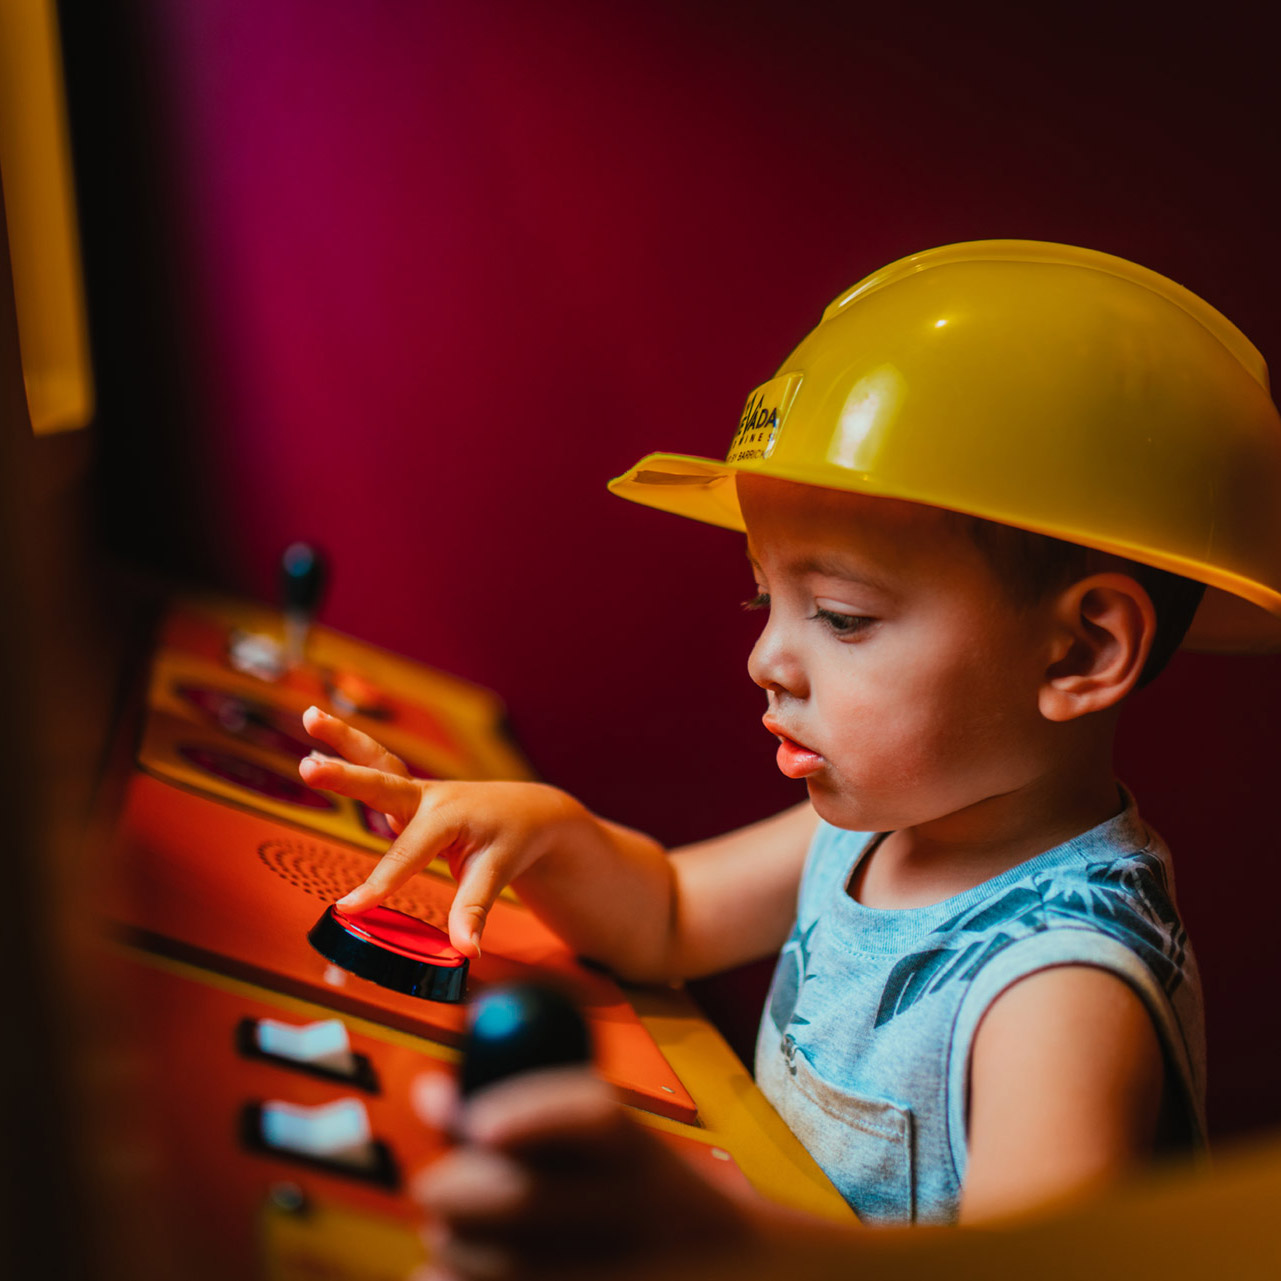 a toddler boy with a hard hat presses a red button on a console at the Discovery Children's Museum